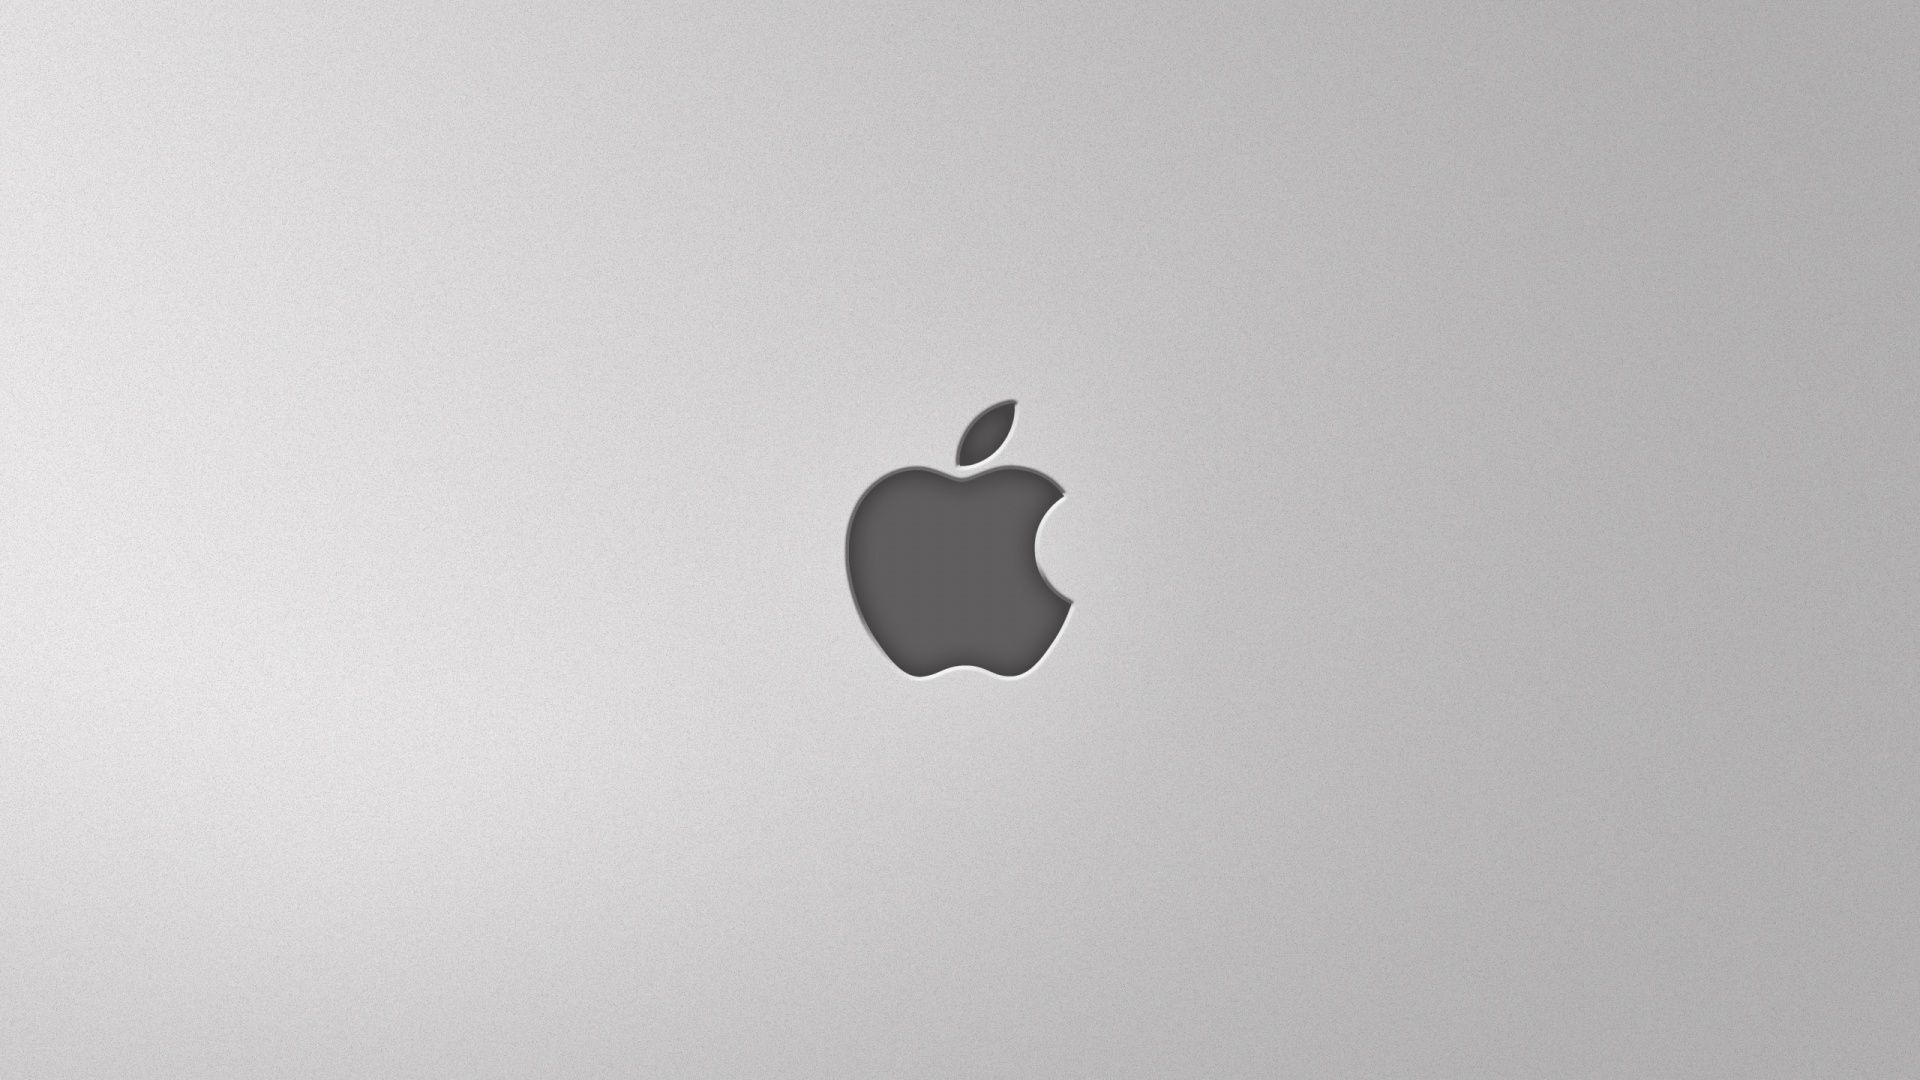 Apple's iOS 10 Already Adopted By 50% of iOS Users. Apple logo wallpaper, Apple logo, Apple wallpaper